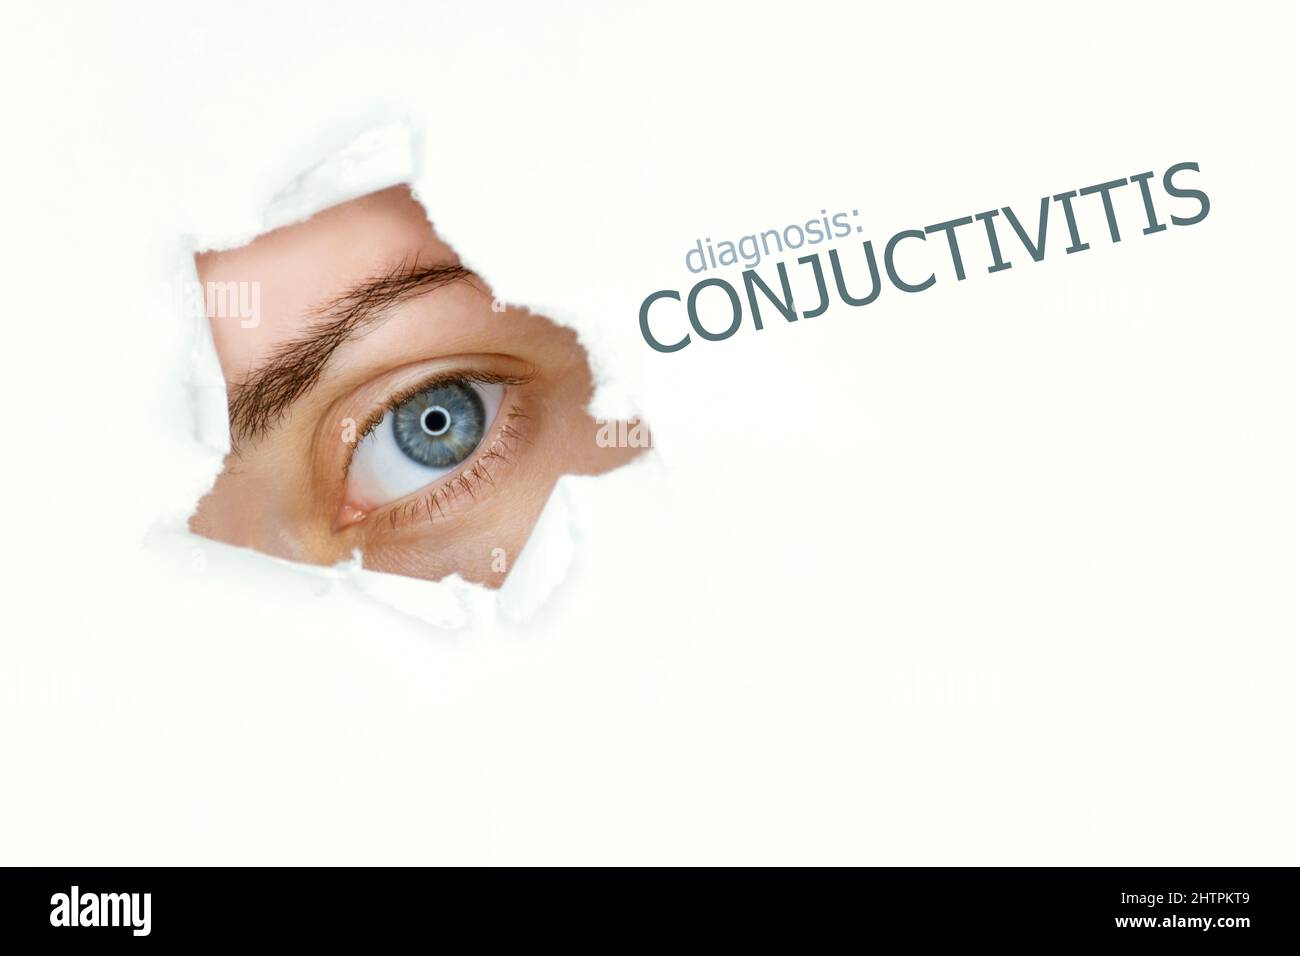 Conjuctivitis disease poster with blue eye on left.Isolated on white Stock Photo